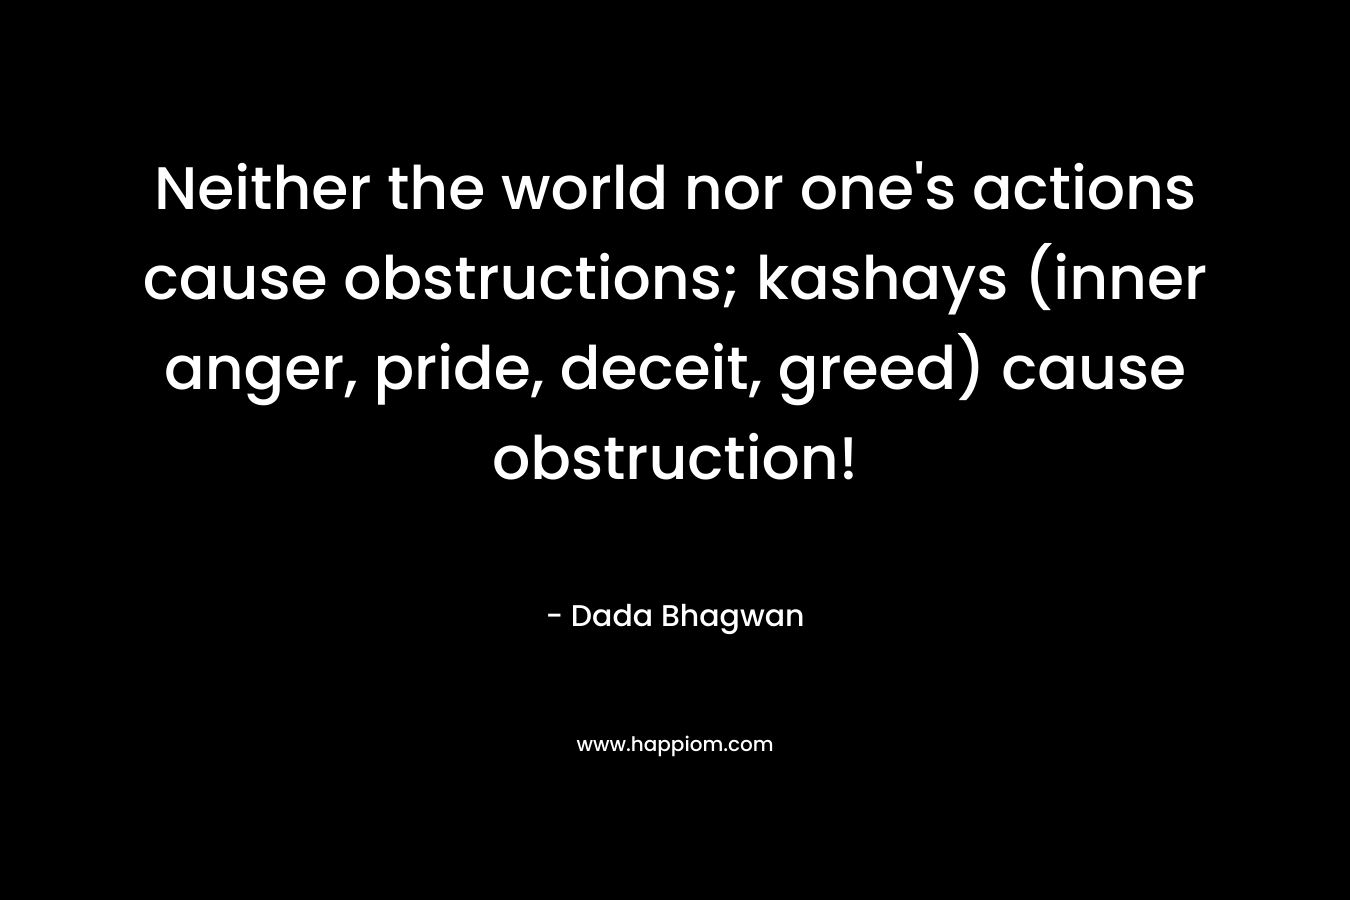 Neither the world nor one's actions cause obstructions; kashays (inner anger, pride, deceit, greed) cause obstruction!